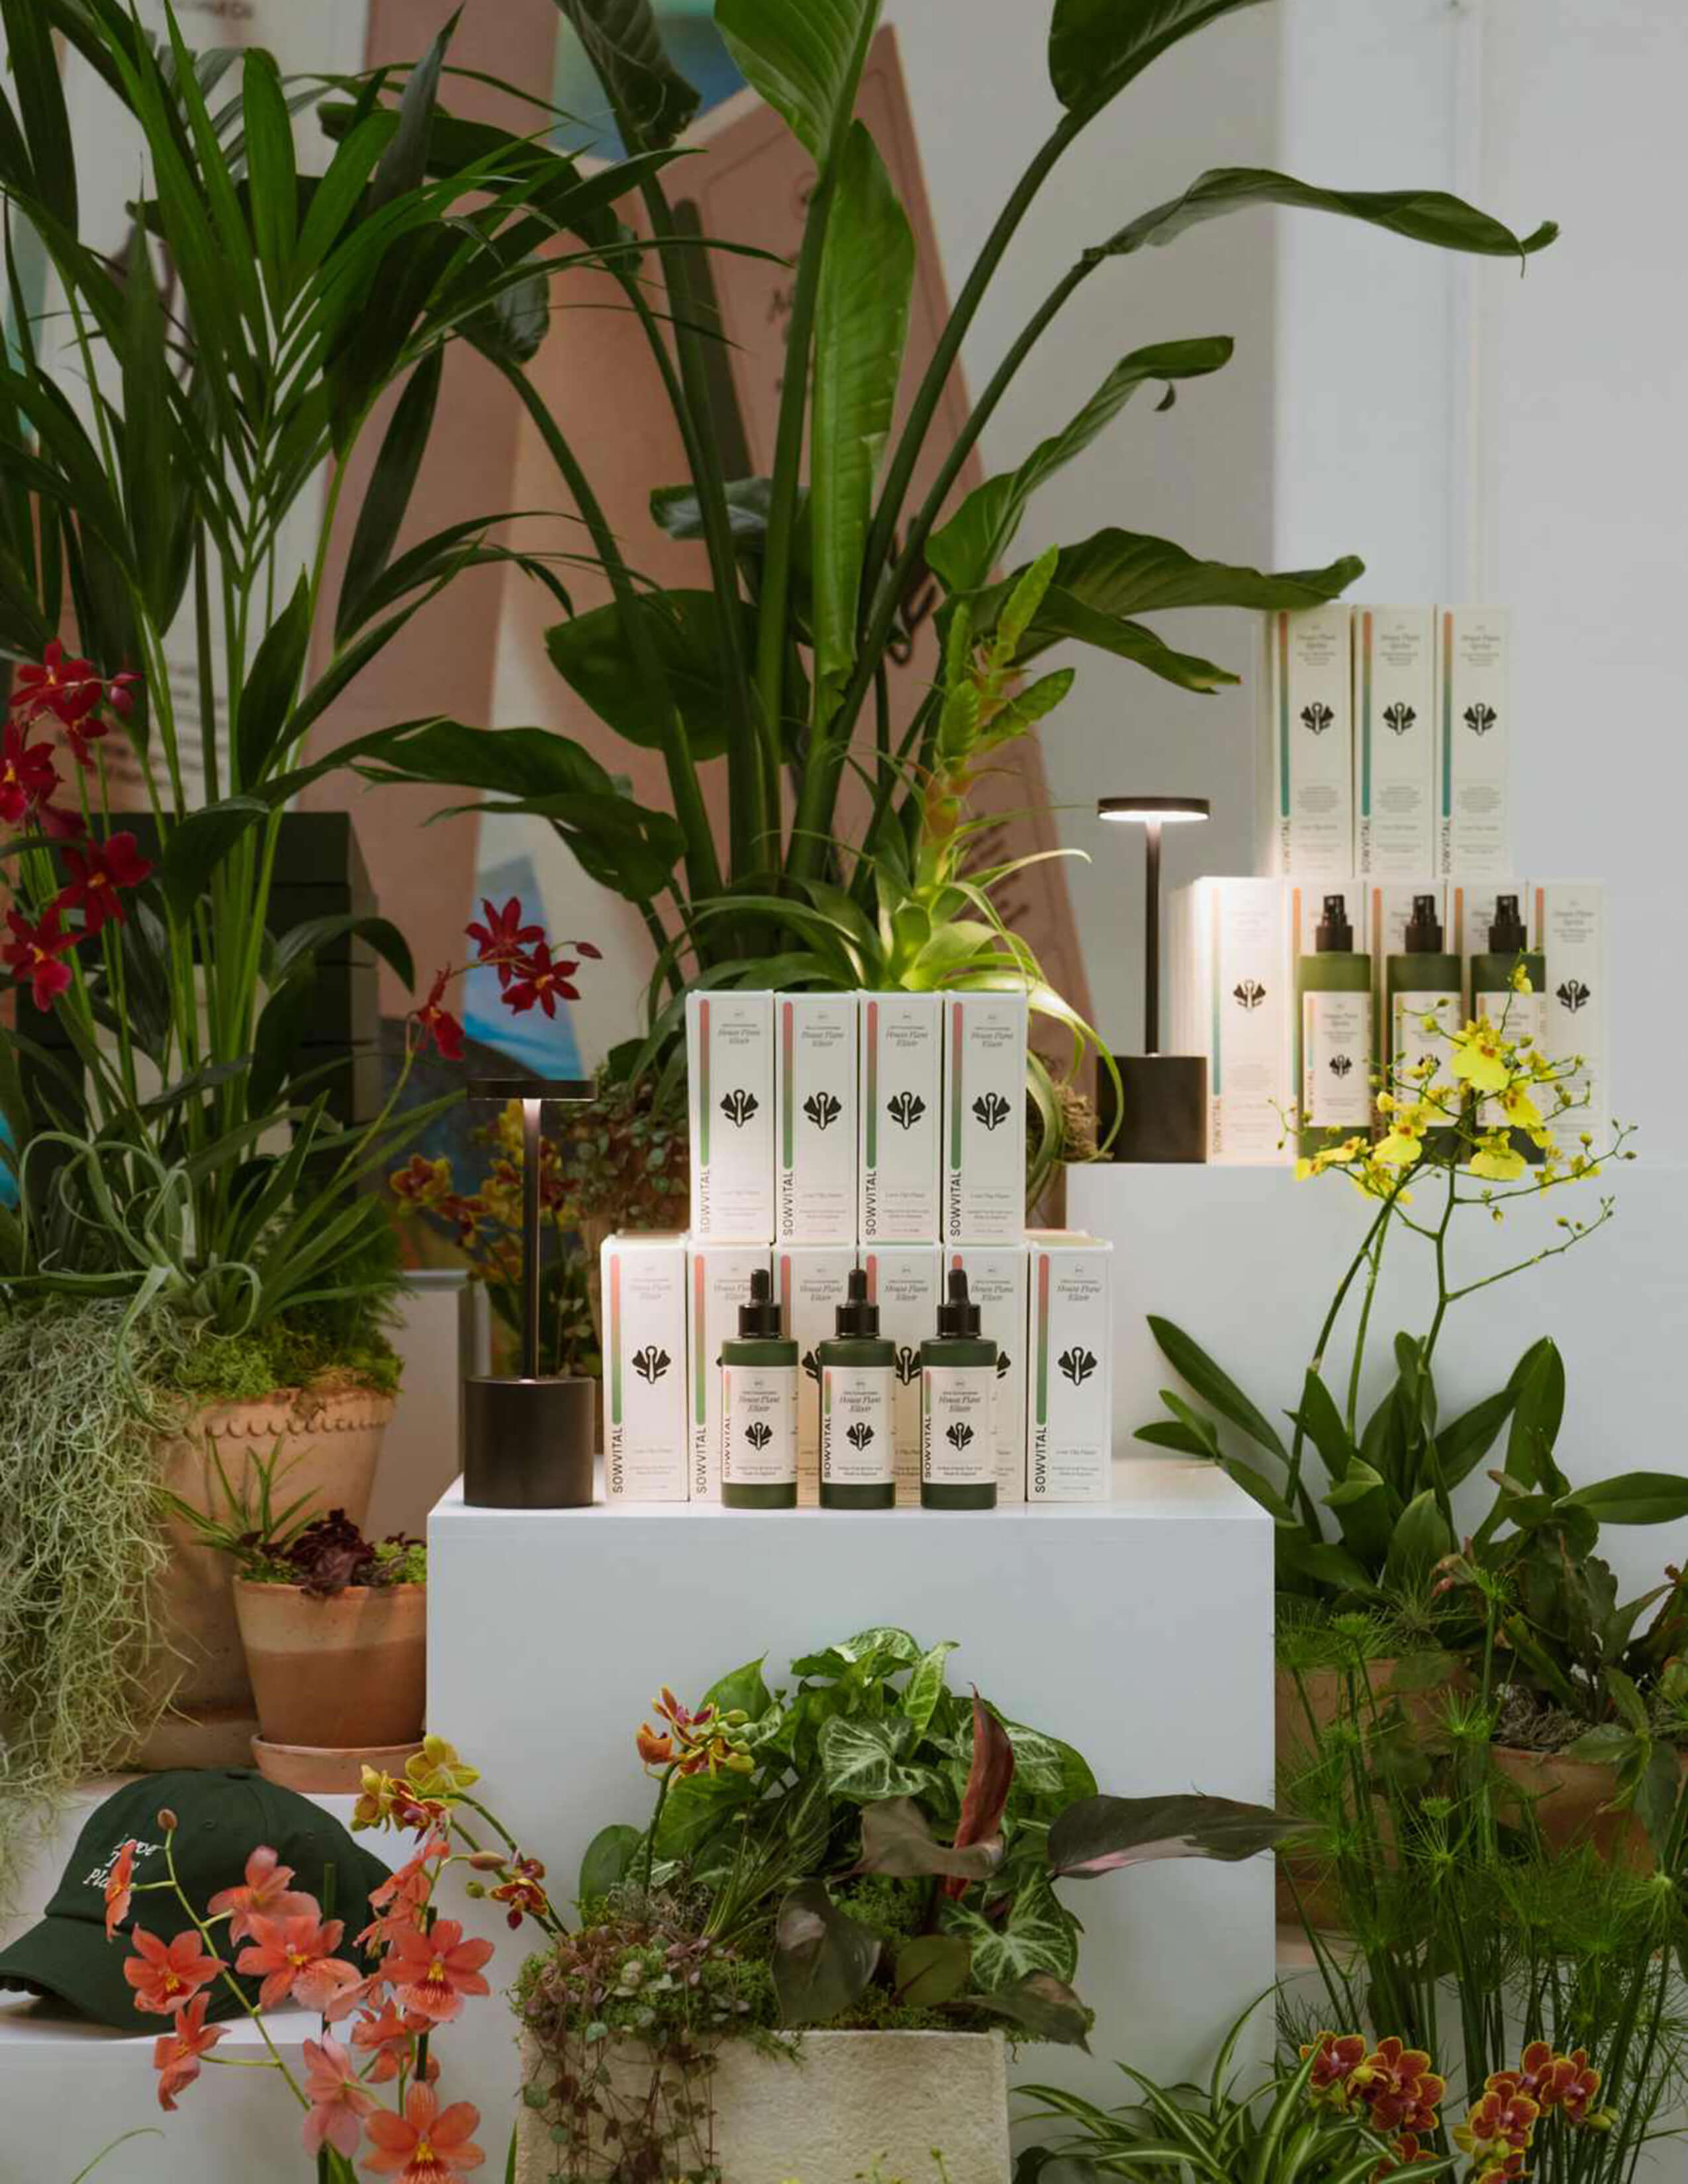 The Sowvital house plant products display with caps and an extensive collection of different plants/flowers.